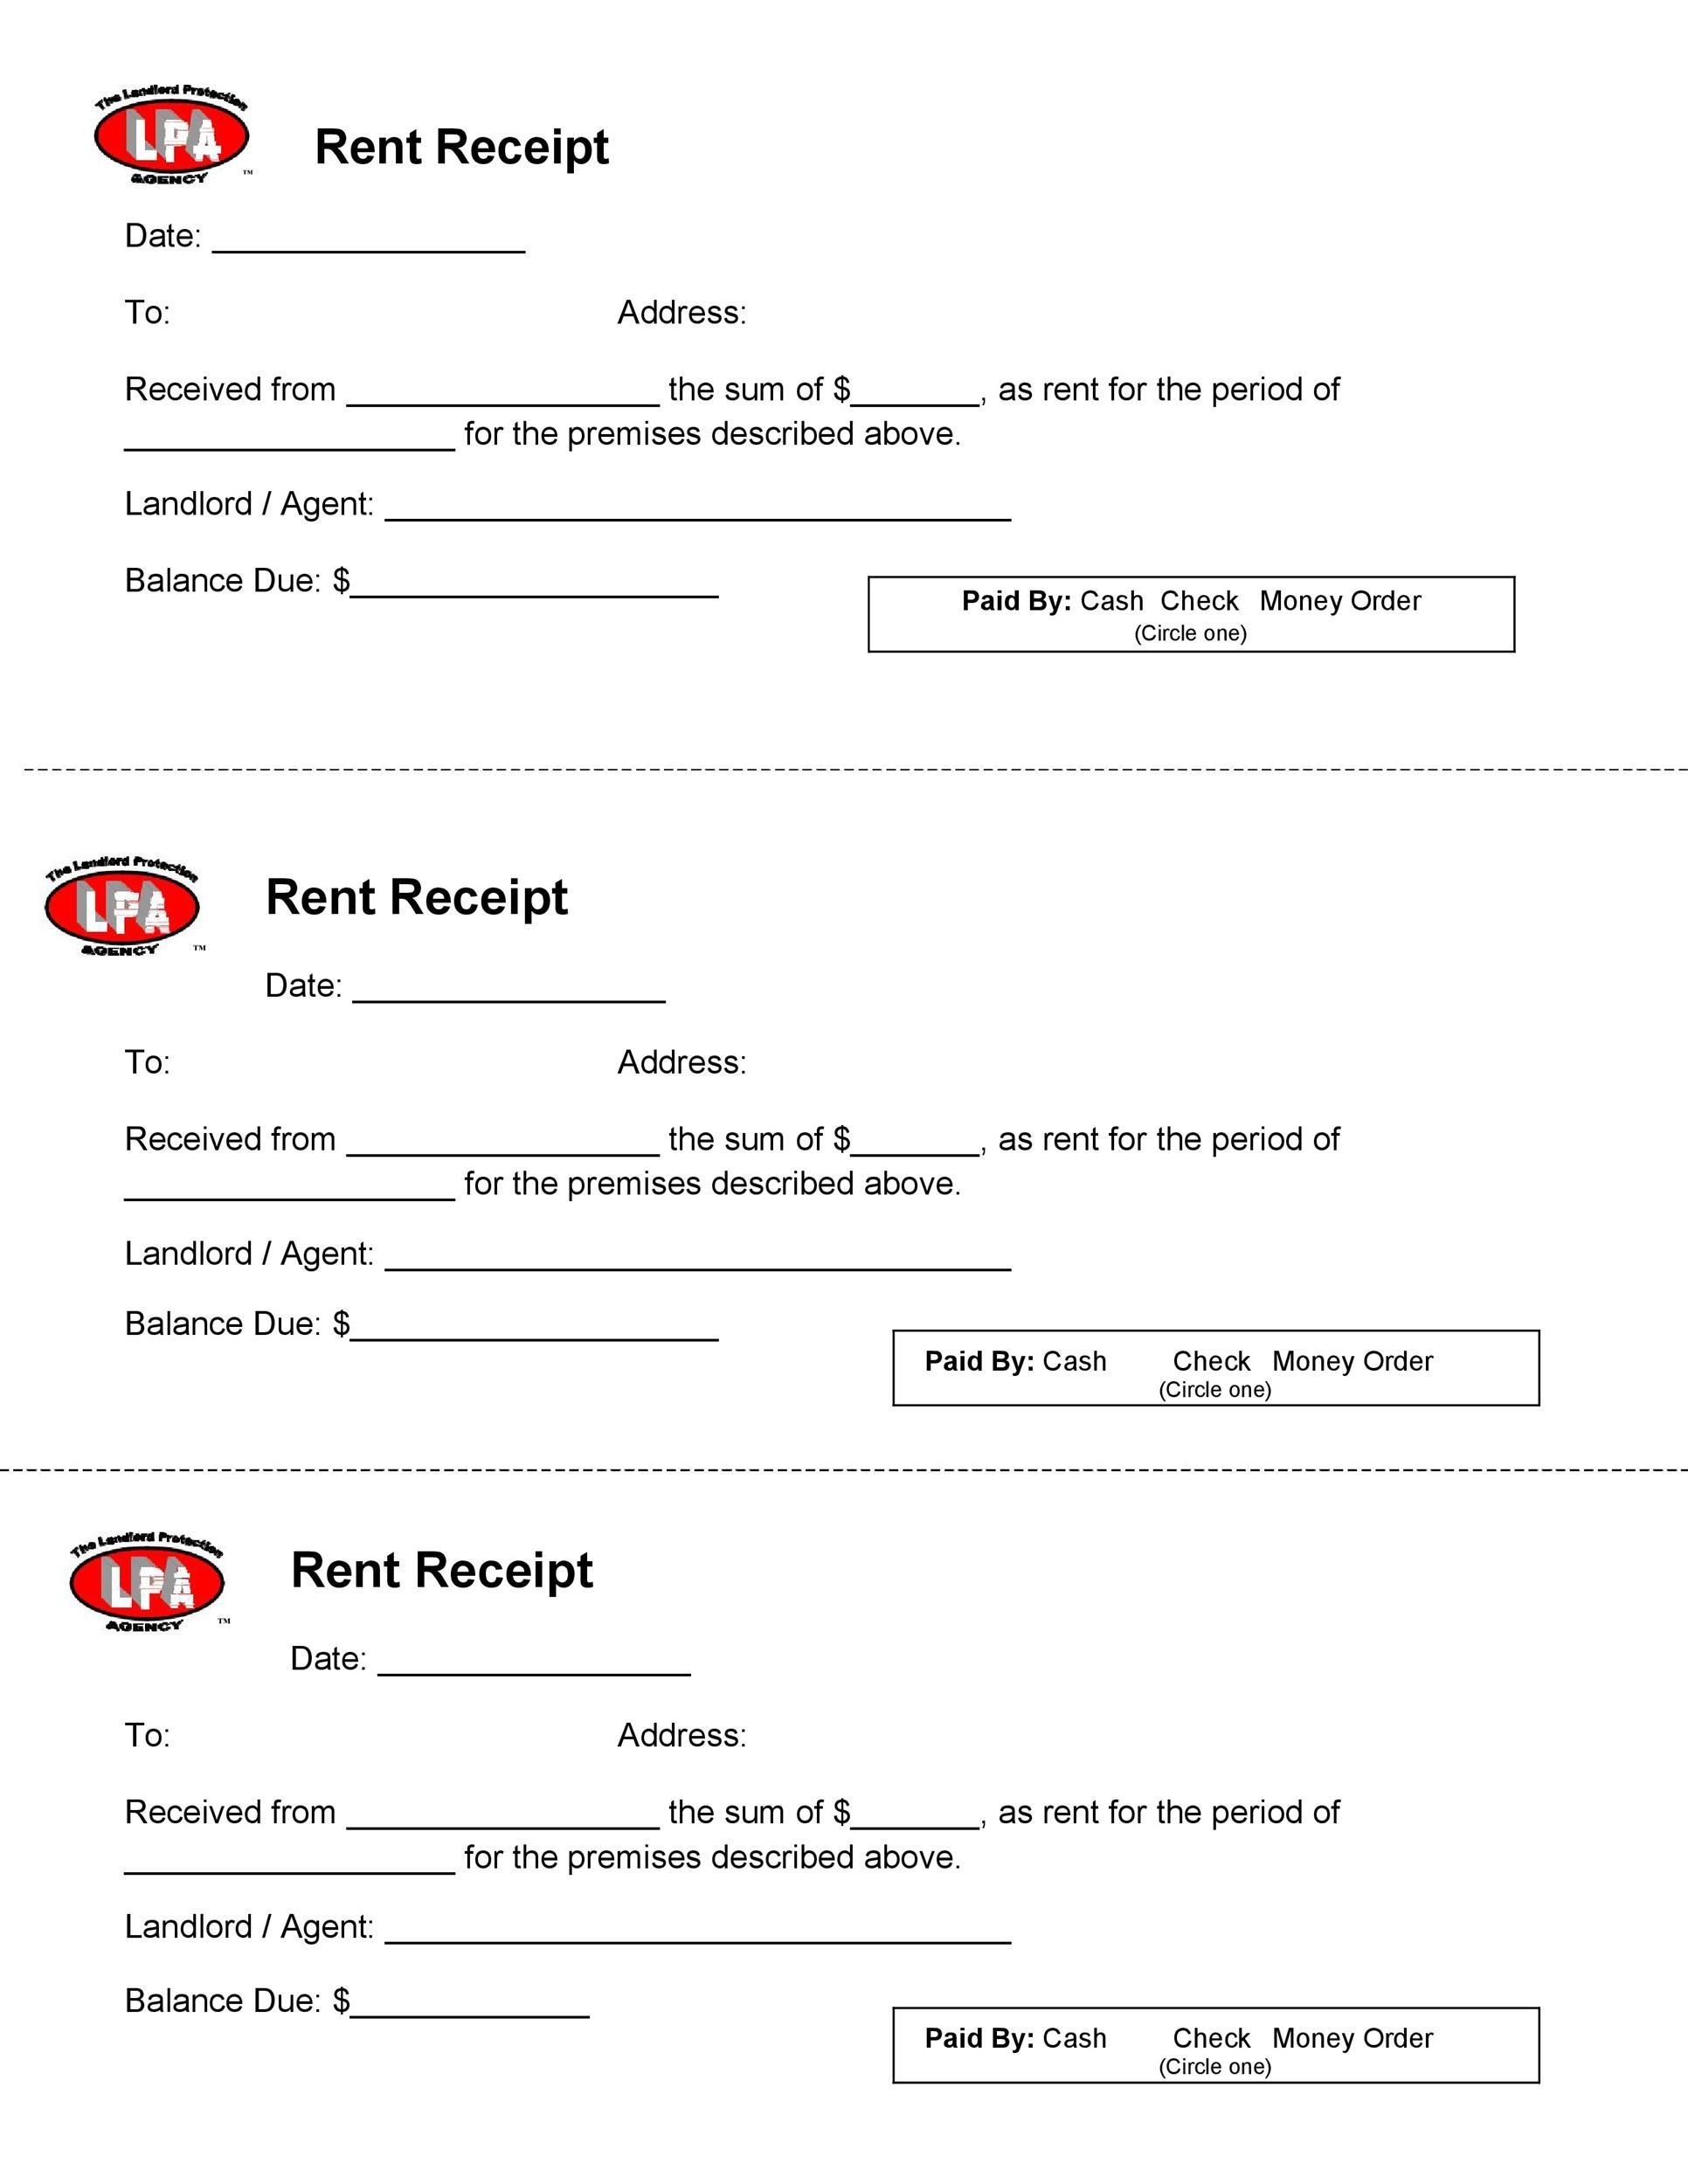 Rent Receipt Pdf Download India TUTORE ORG Master of Documents